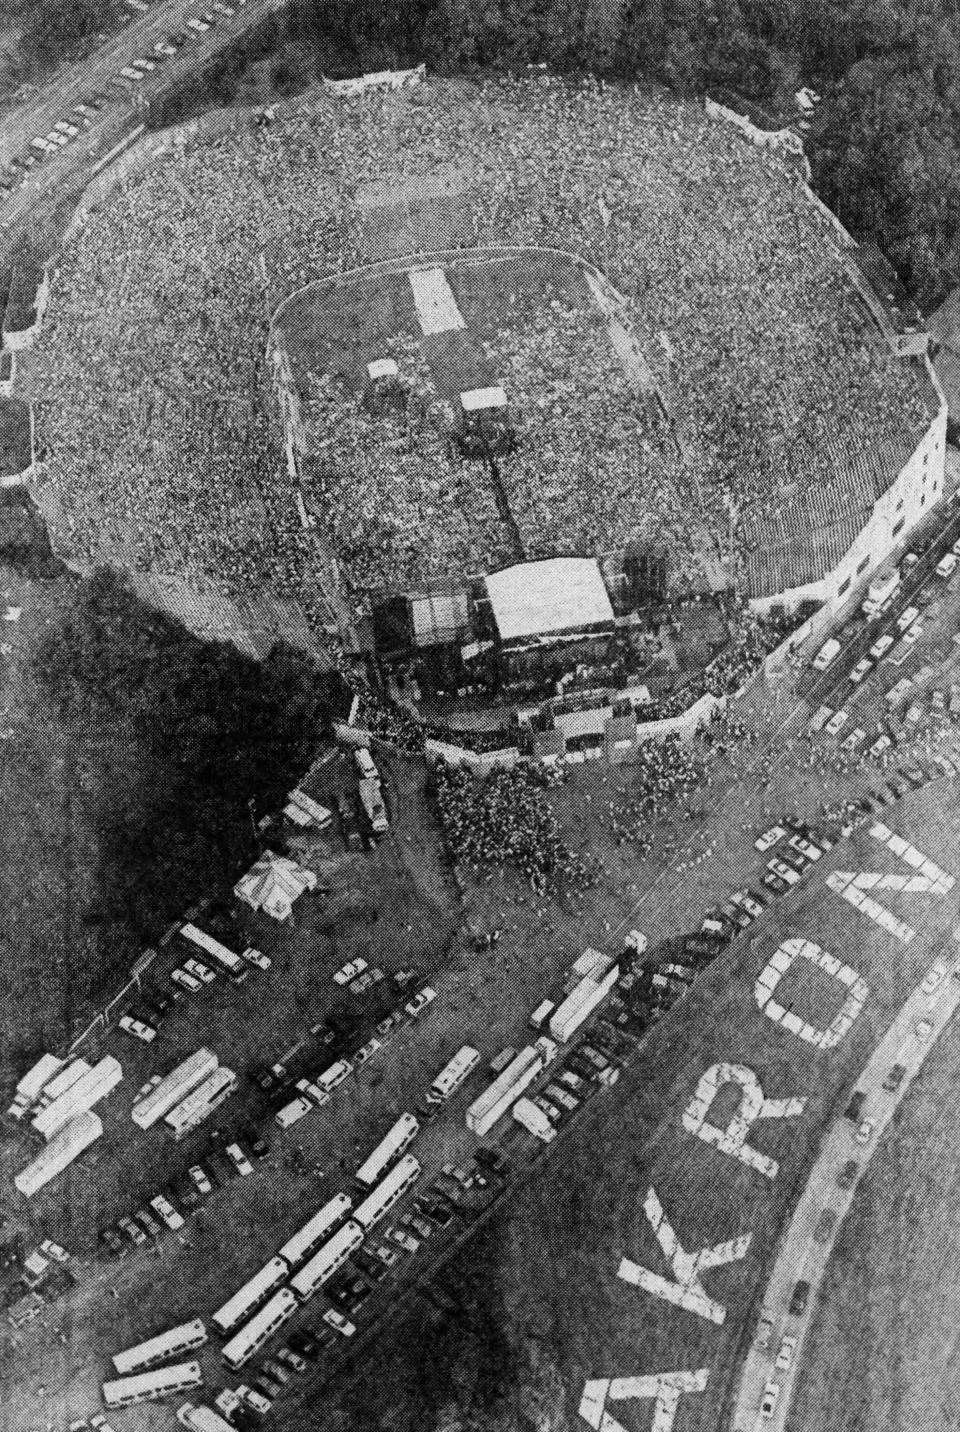 Nearly 40,000 people converge on the Rubber Bowl for the Simon & Garfunkel concert in 1983 in Akron.